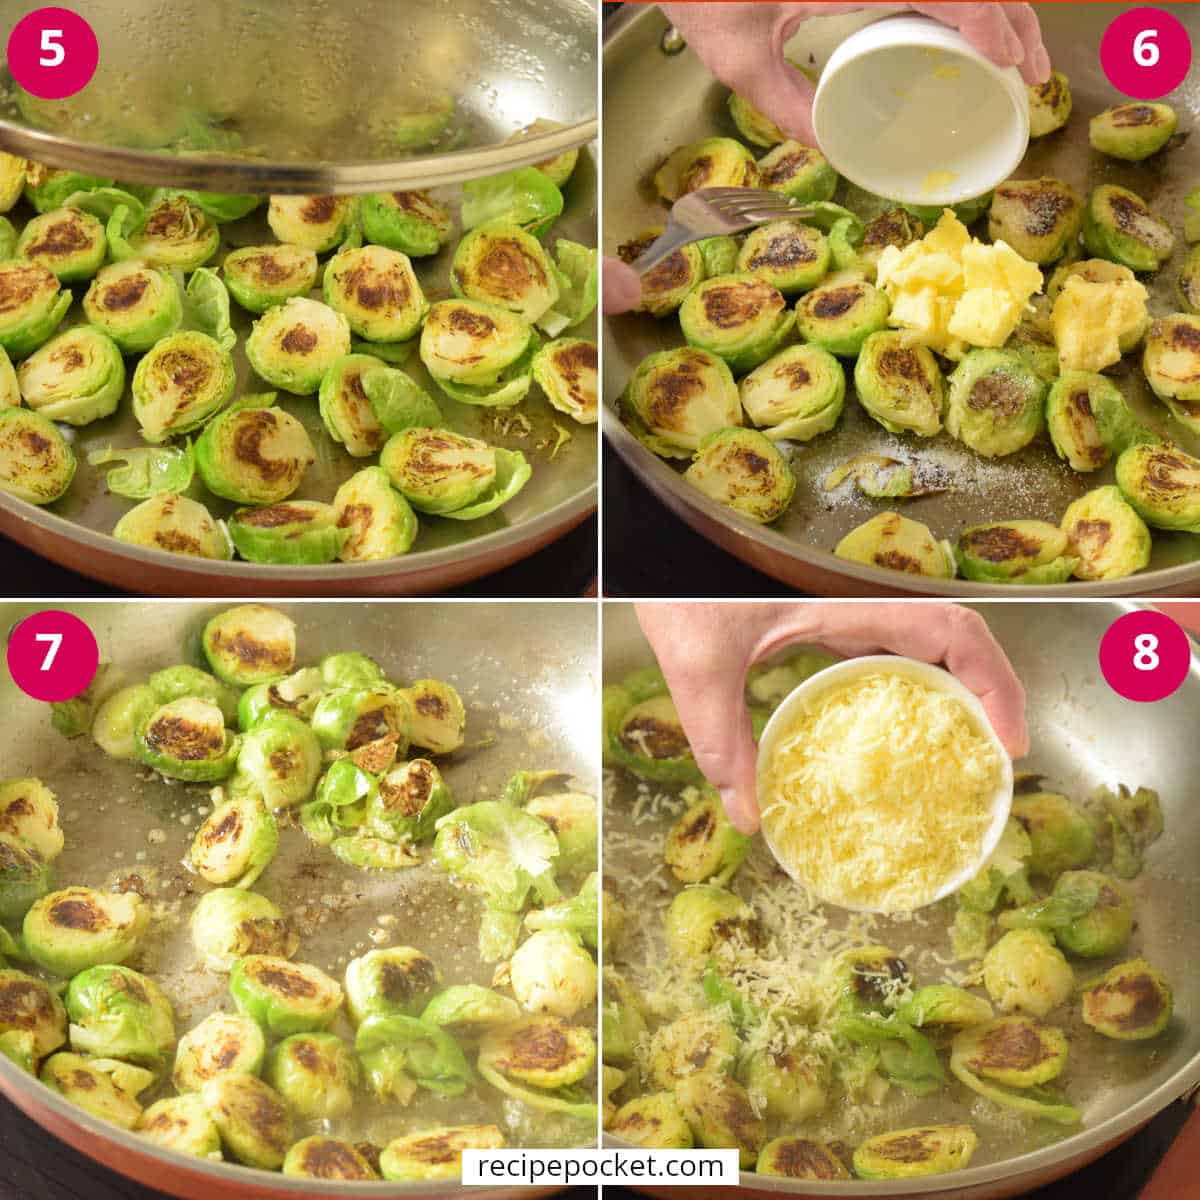 Four part image showing cooked Brussel spouts with and without cheese.